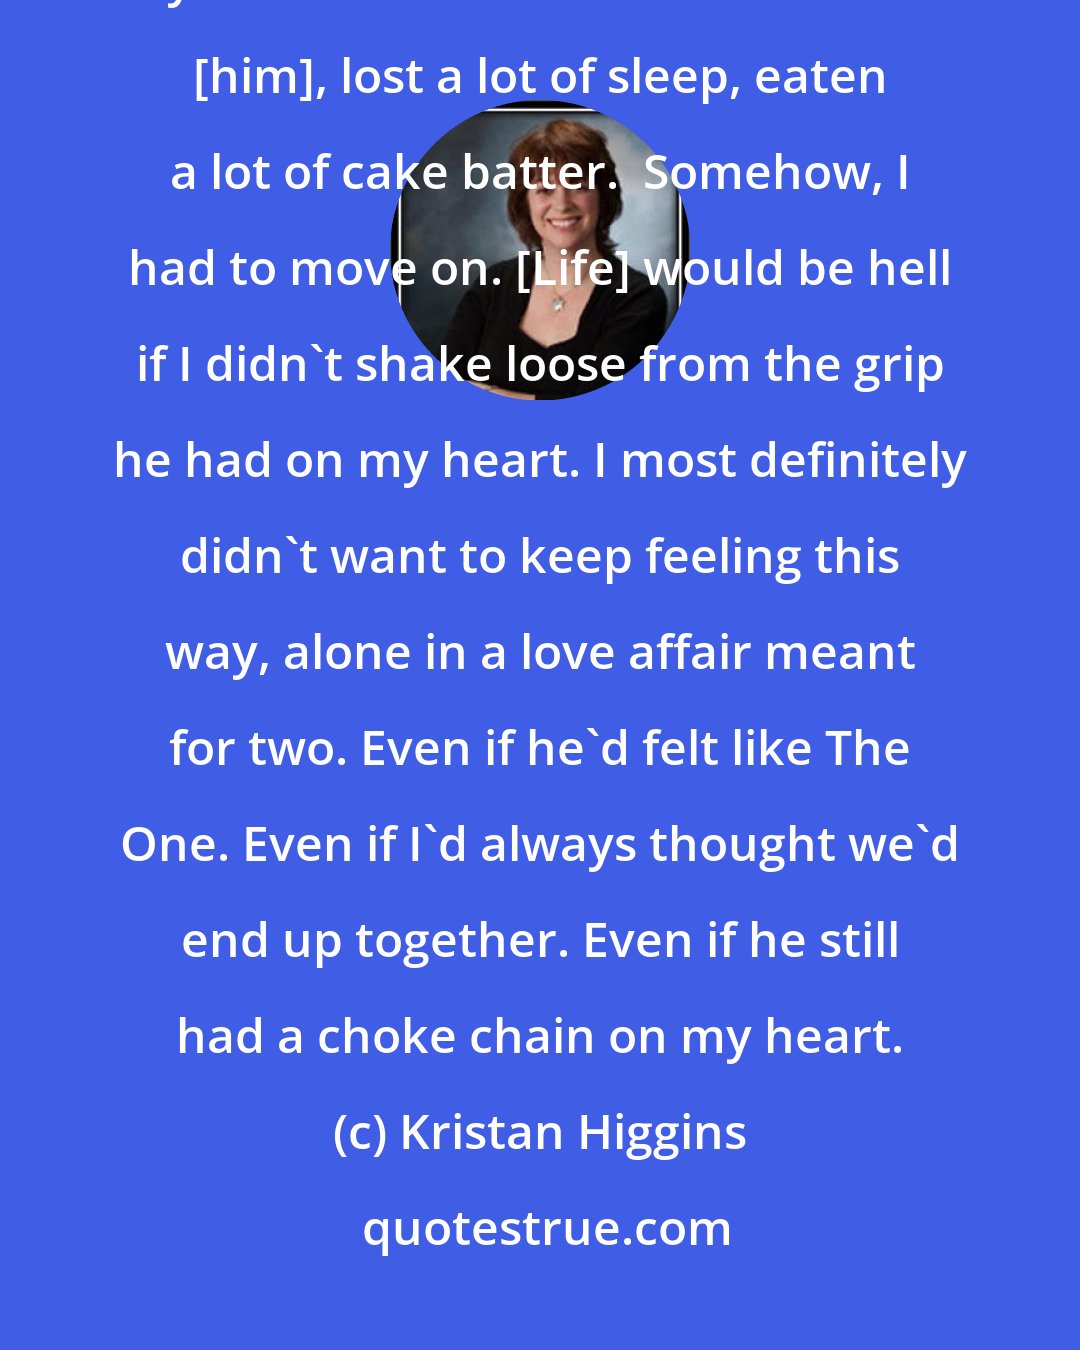 Kristan Higgins: I had to get over [him]. For months now, a stone had been sitting on my heart. I'd shed a lot of tears over [him], lost a lot of sleep, eaten a lot of cake batter.  Somehow, I had to move on. [Life] would be hell if I didn't shake loose from the grip he had on my heart. I most definitely didn't want to keep feeling this way, alone in a love affair meant for two. Even if he'd felt like The One. Even if I'd always thought we'd end up together. Even if he still had a choke chain on my heart.